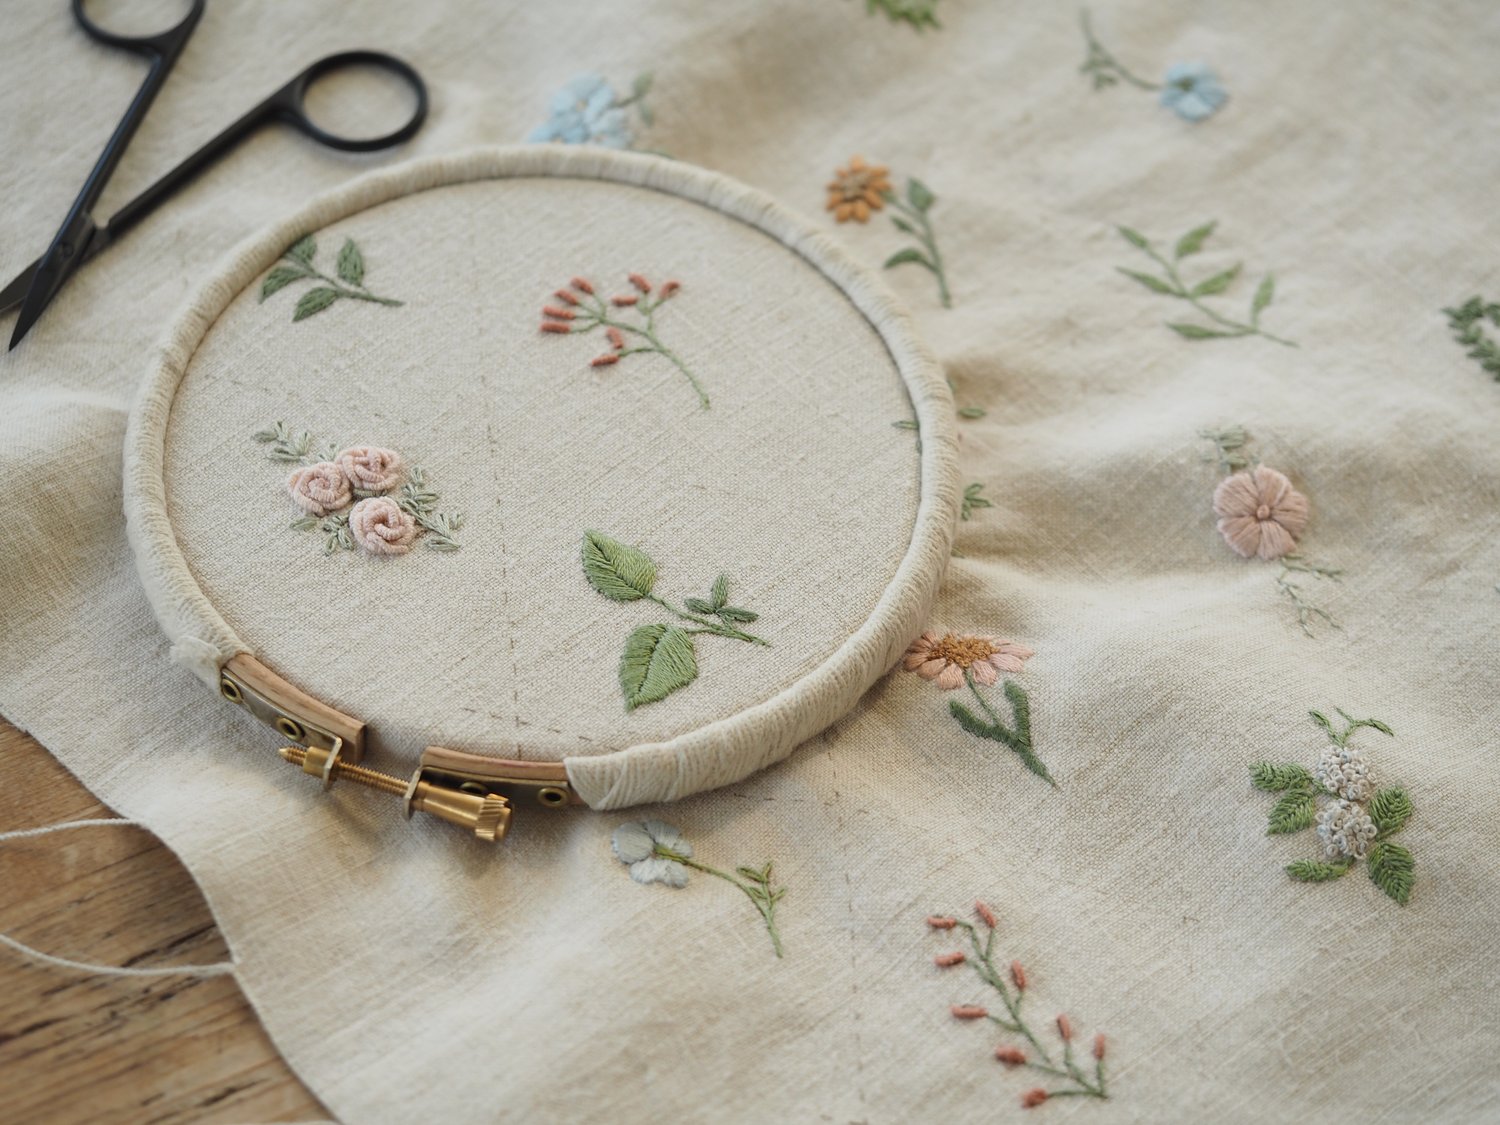 The Stitchery Embroidery Kit Vintage Floral Basket - Willow